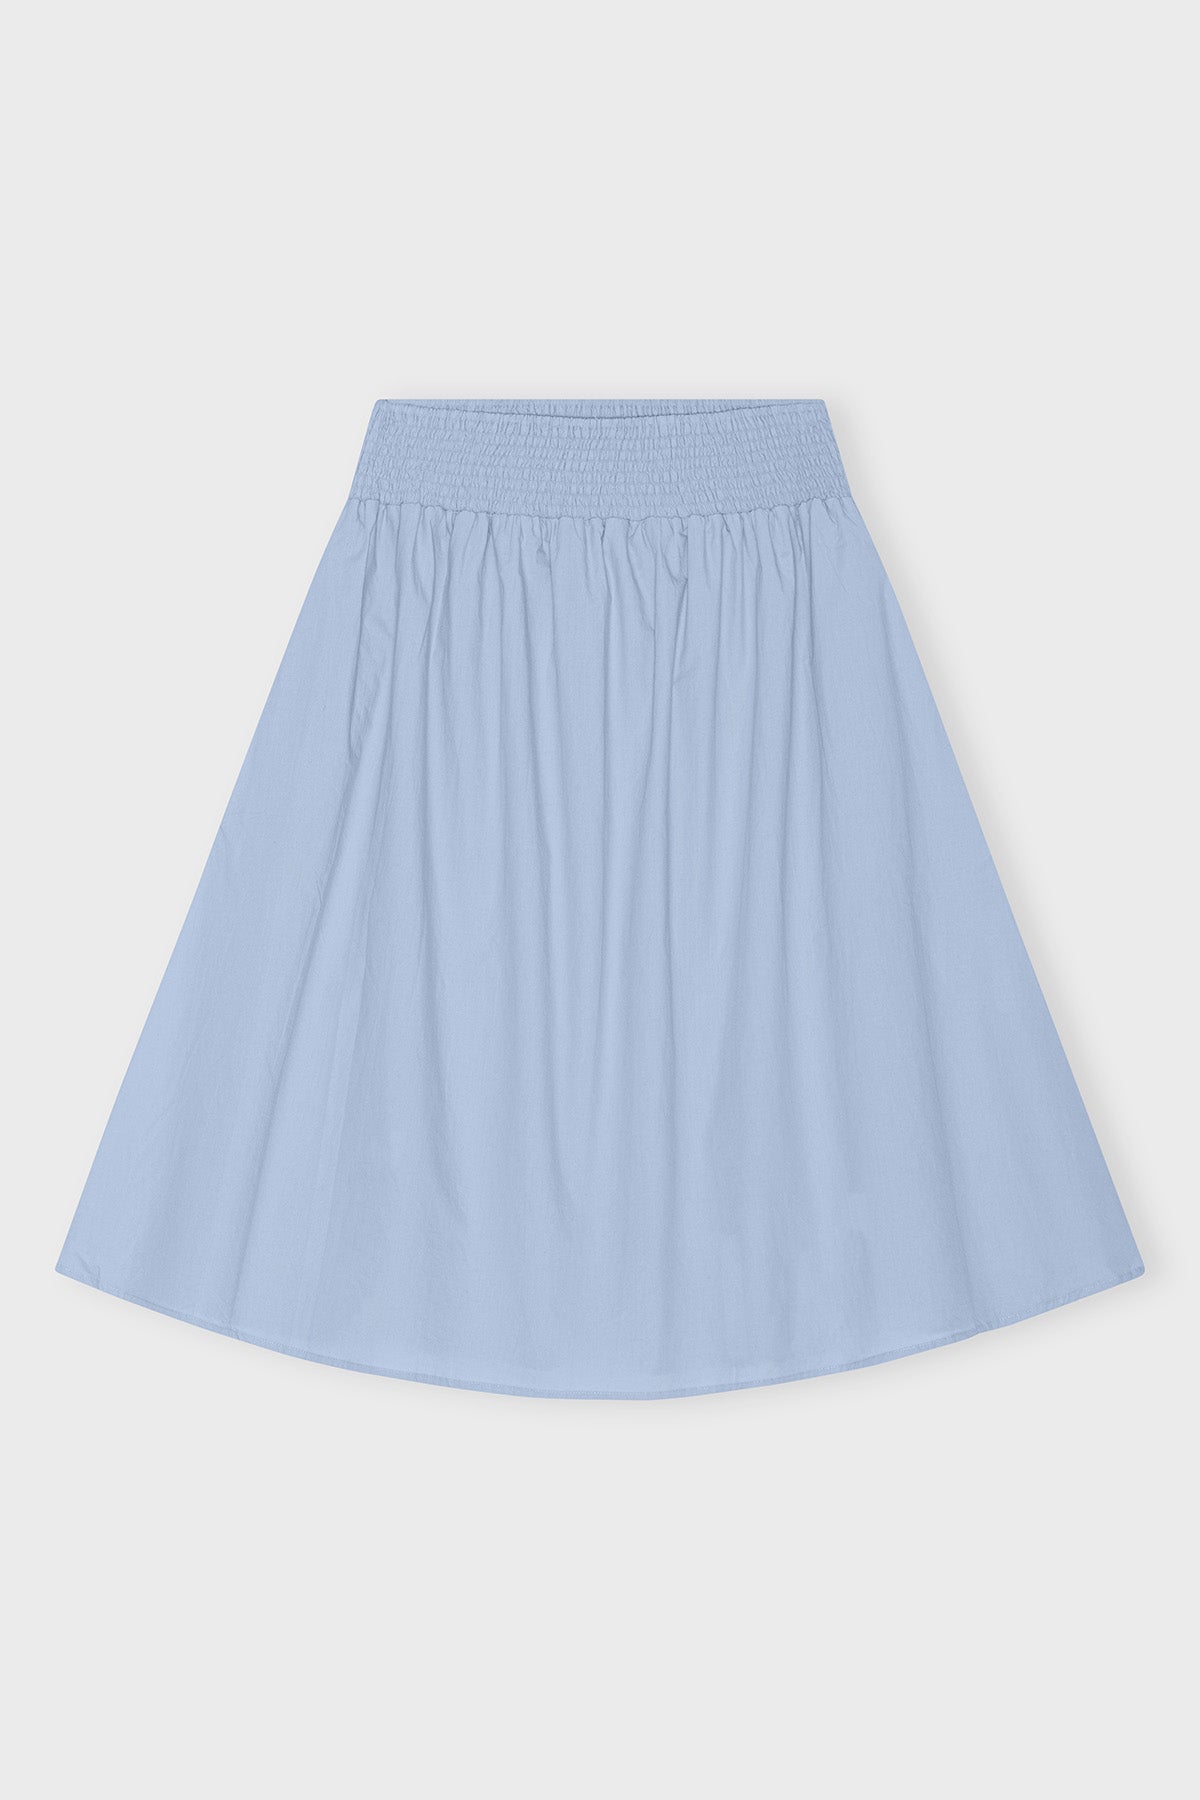 CARE BY ME Laura Skirt